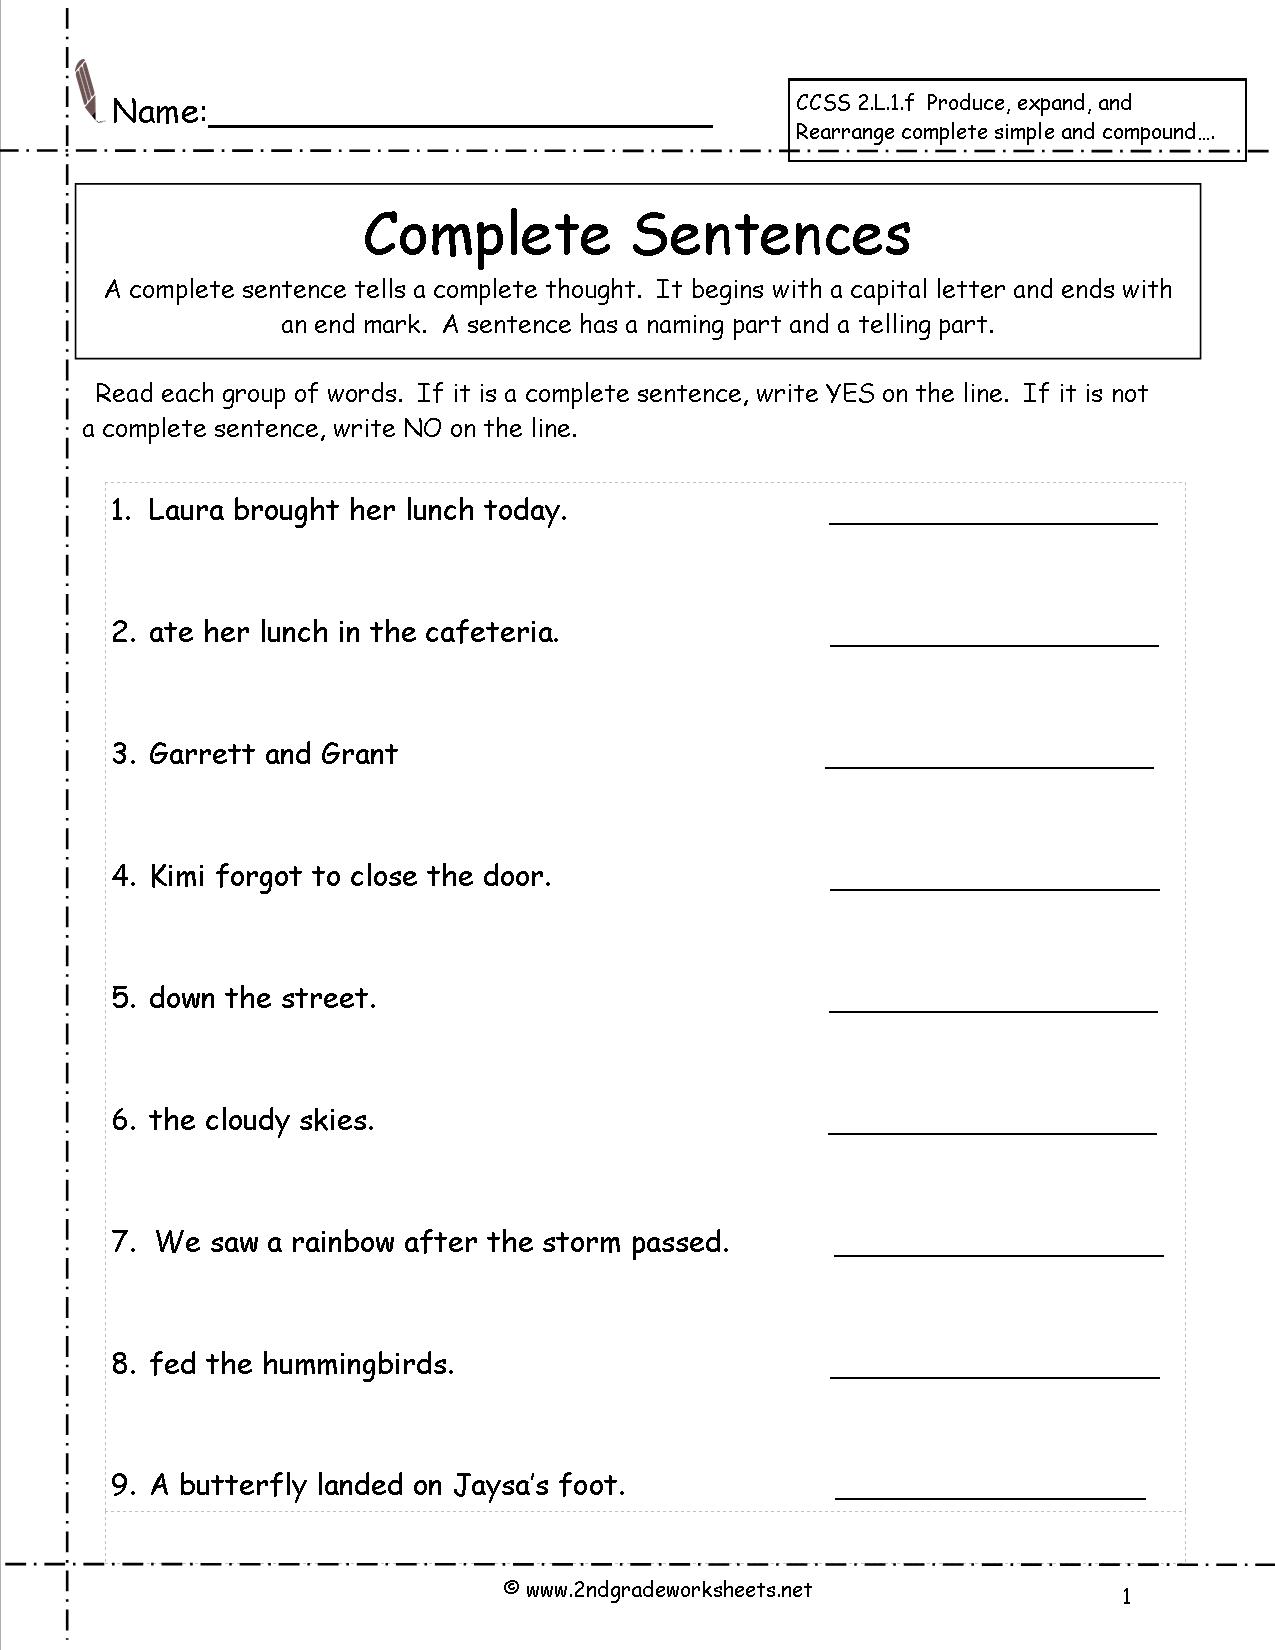 worksheet-wednesday-wordless-wednesday-7-9-14-nouns-and-verbs-multiple-meaning-words